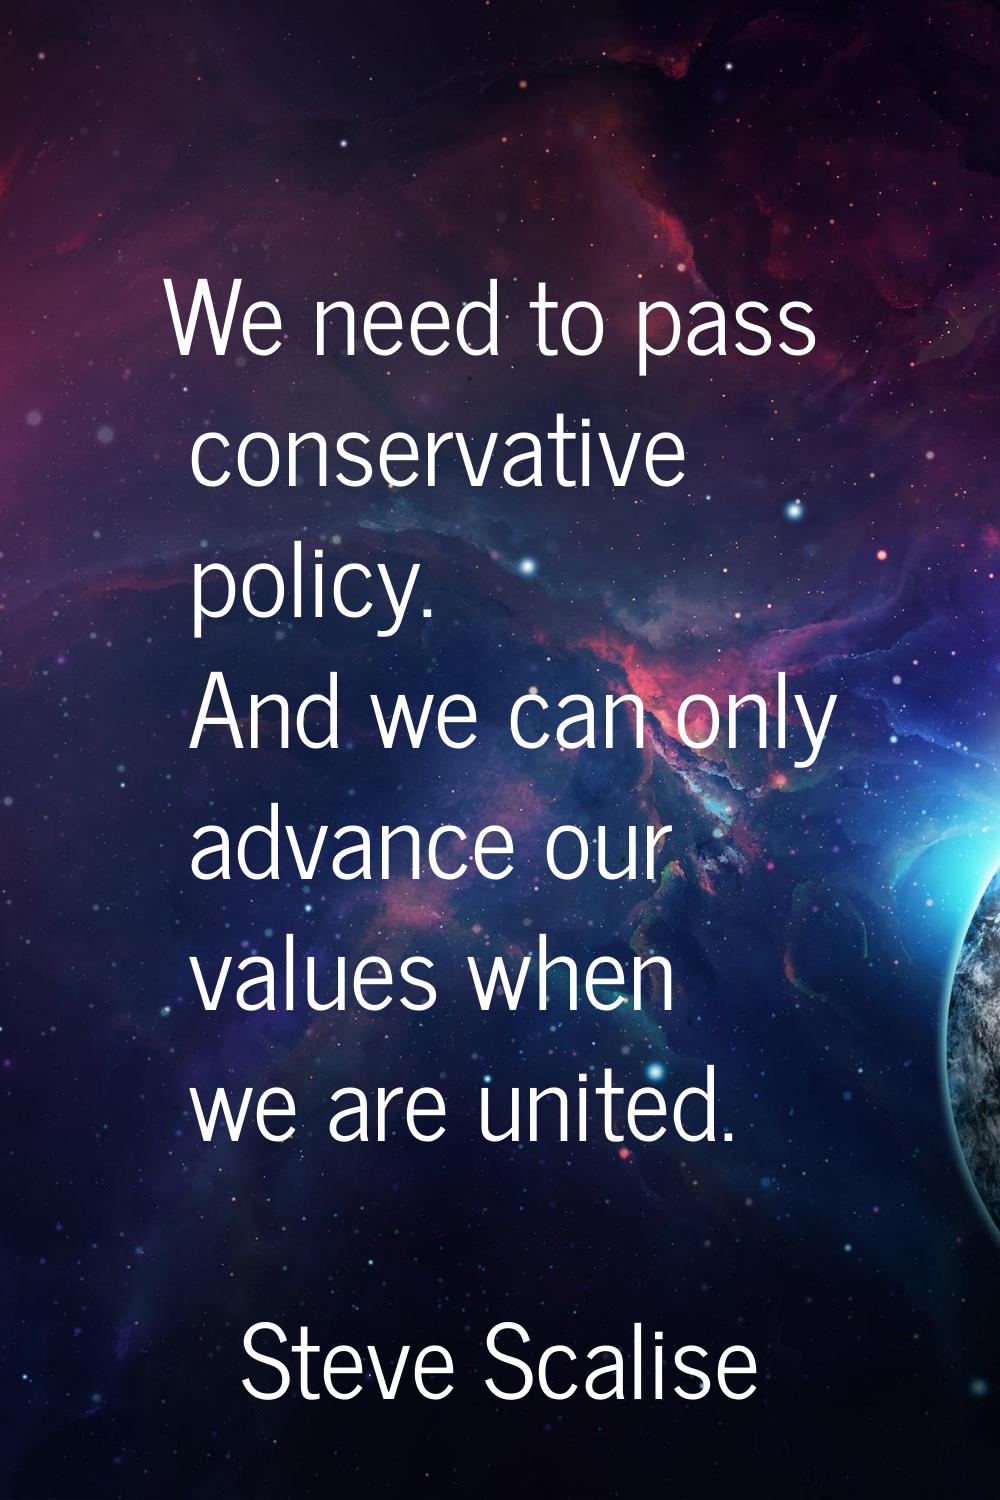 We need to pass conservative policy. And we can only advance our values when we are united.